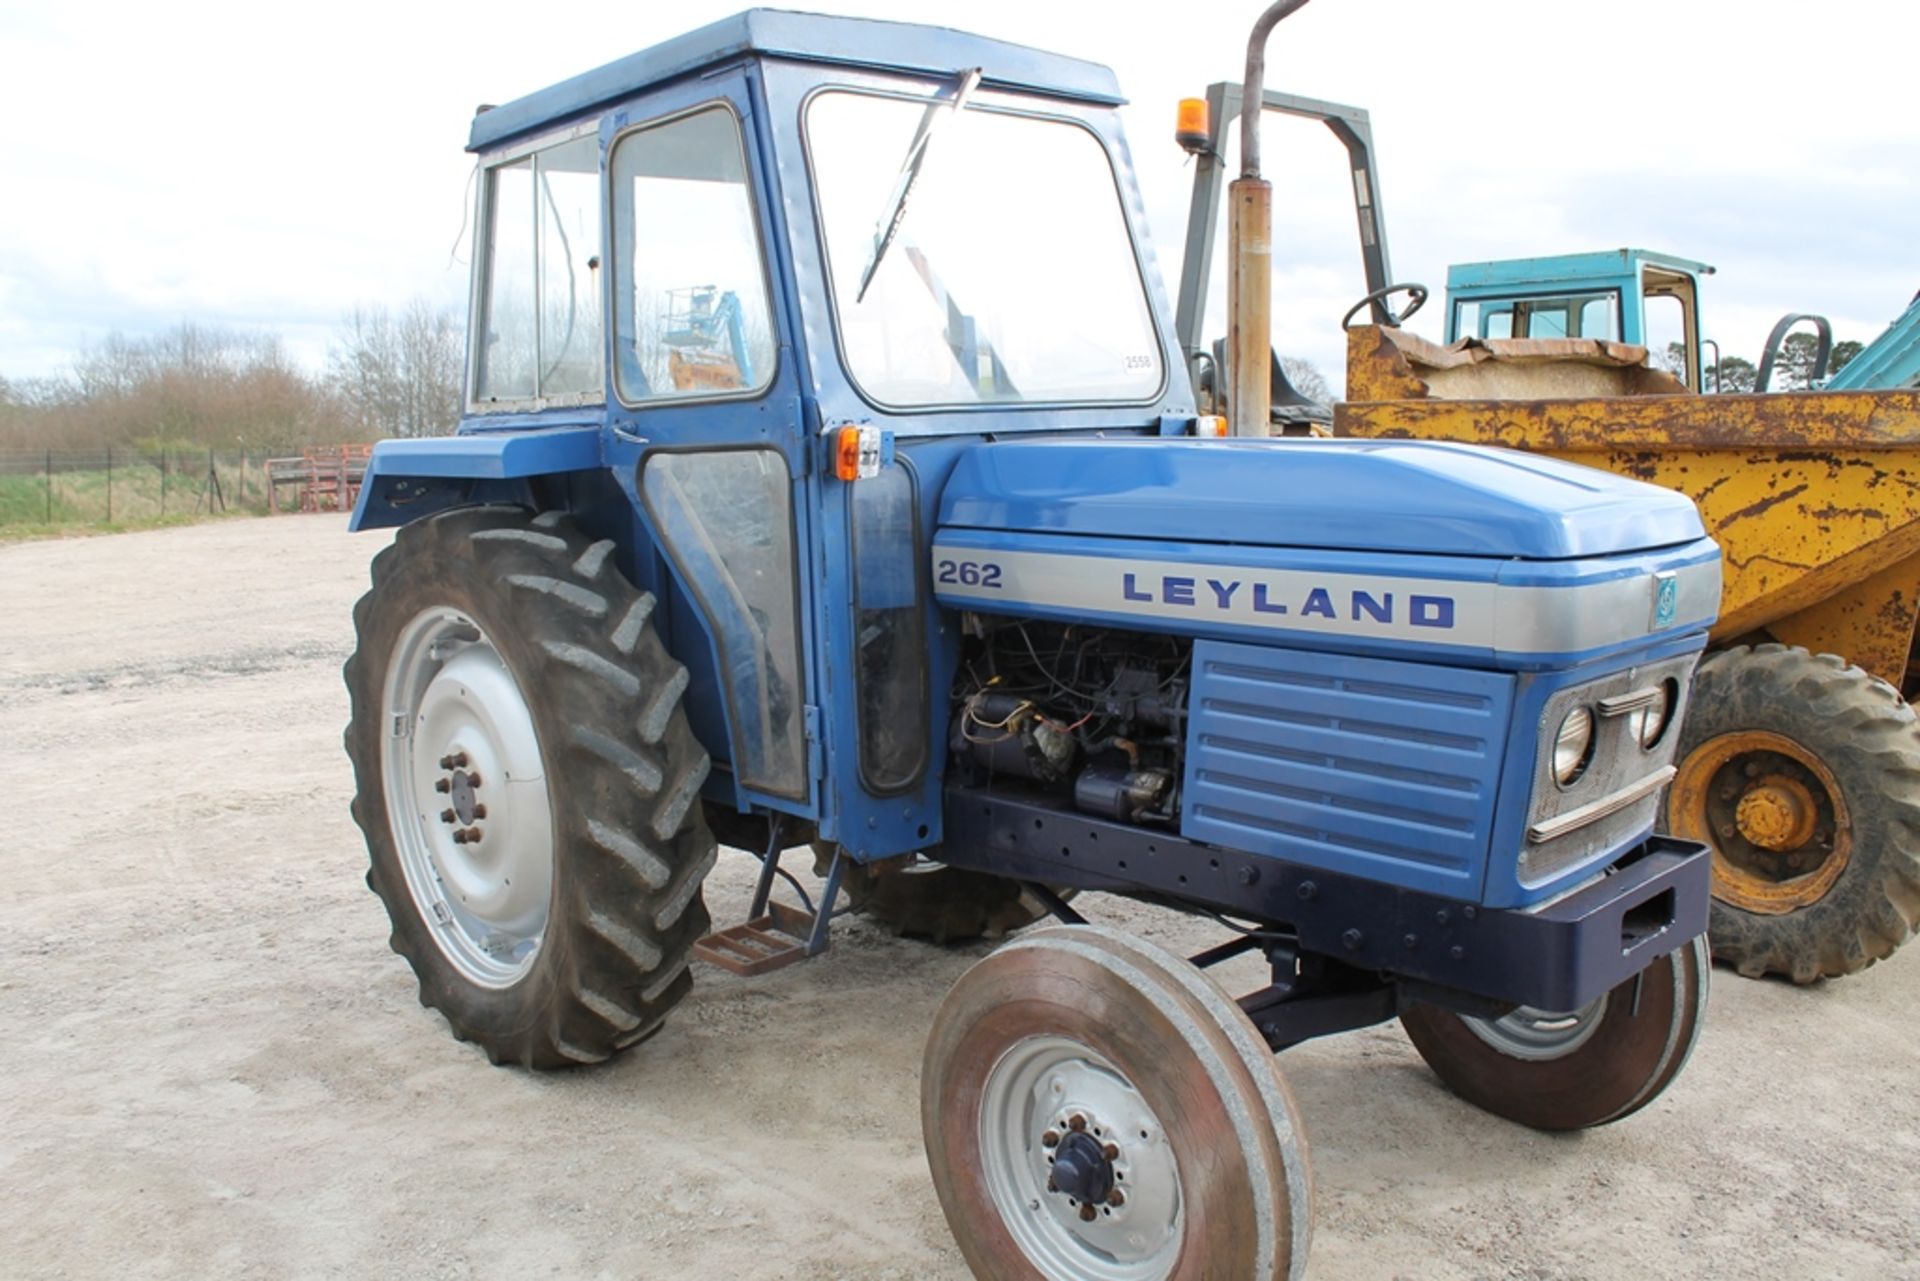 Leyland Freighter Others - 0cc Tractor - Image 4 of 5